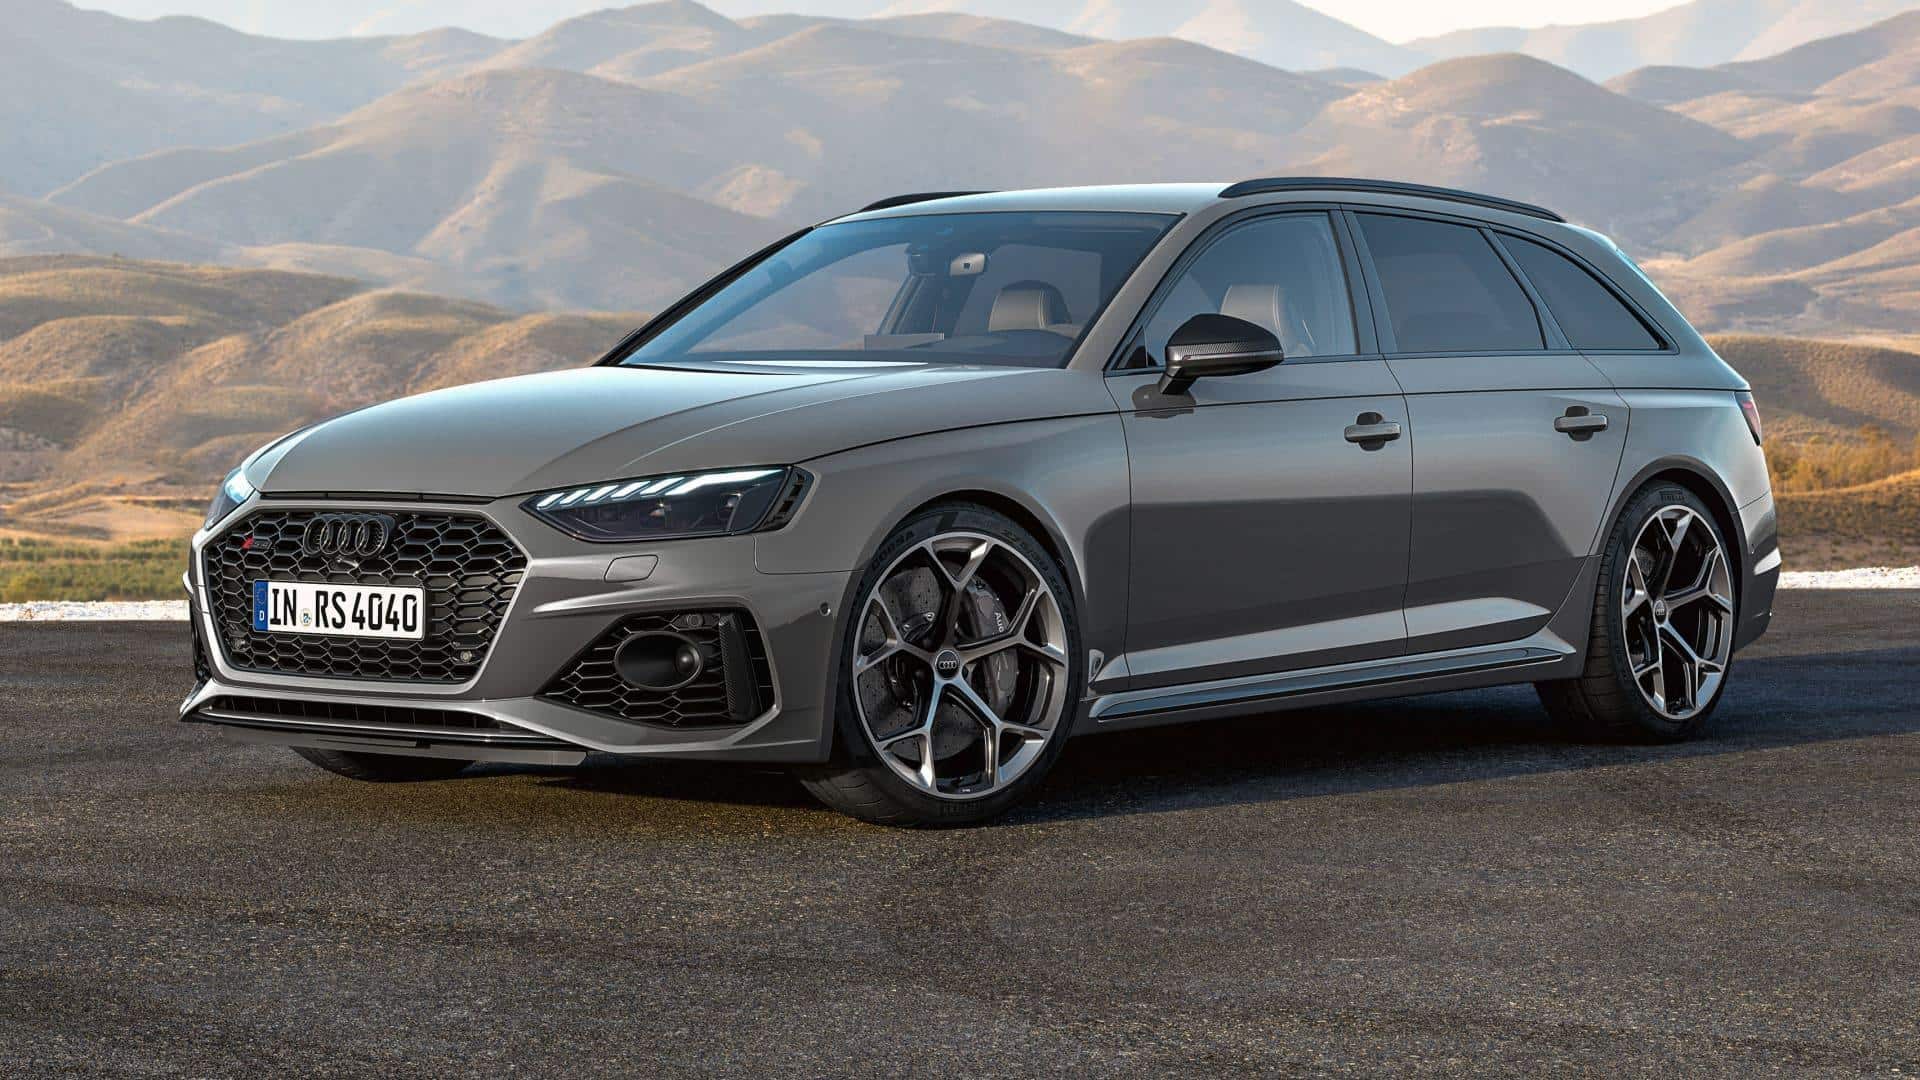 Audi RS5 Avant estate to debut in 2025: Expected features